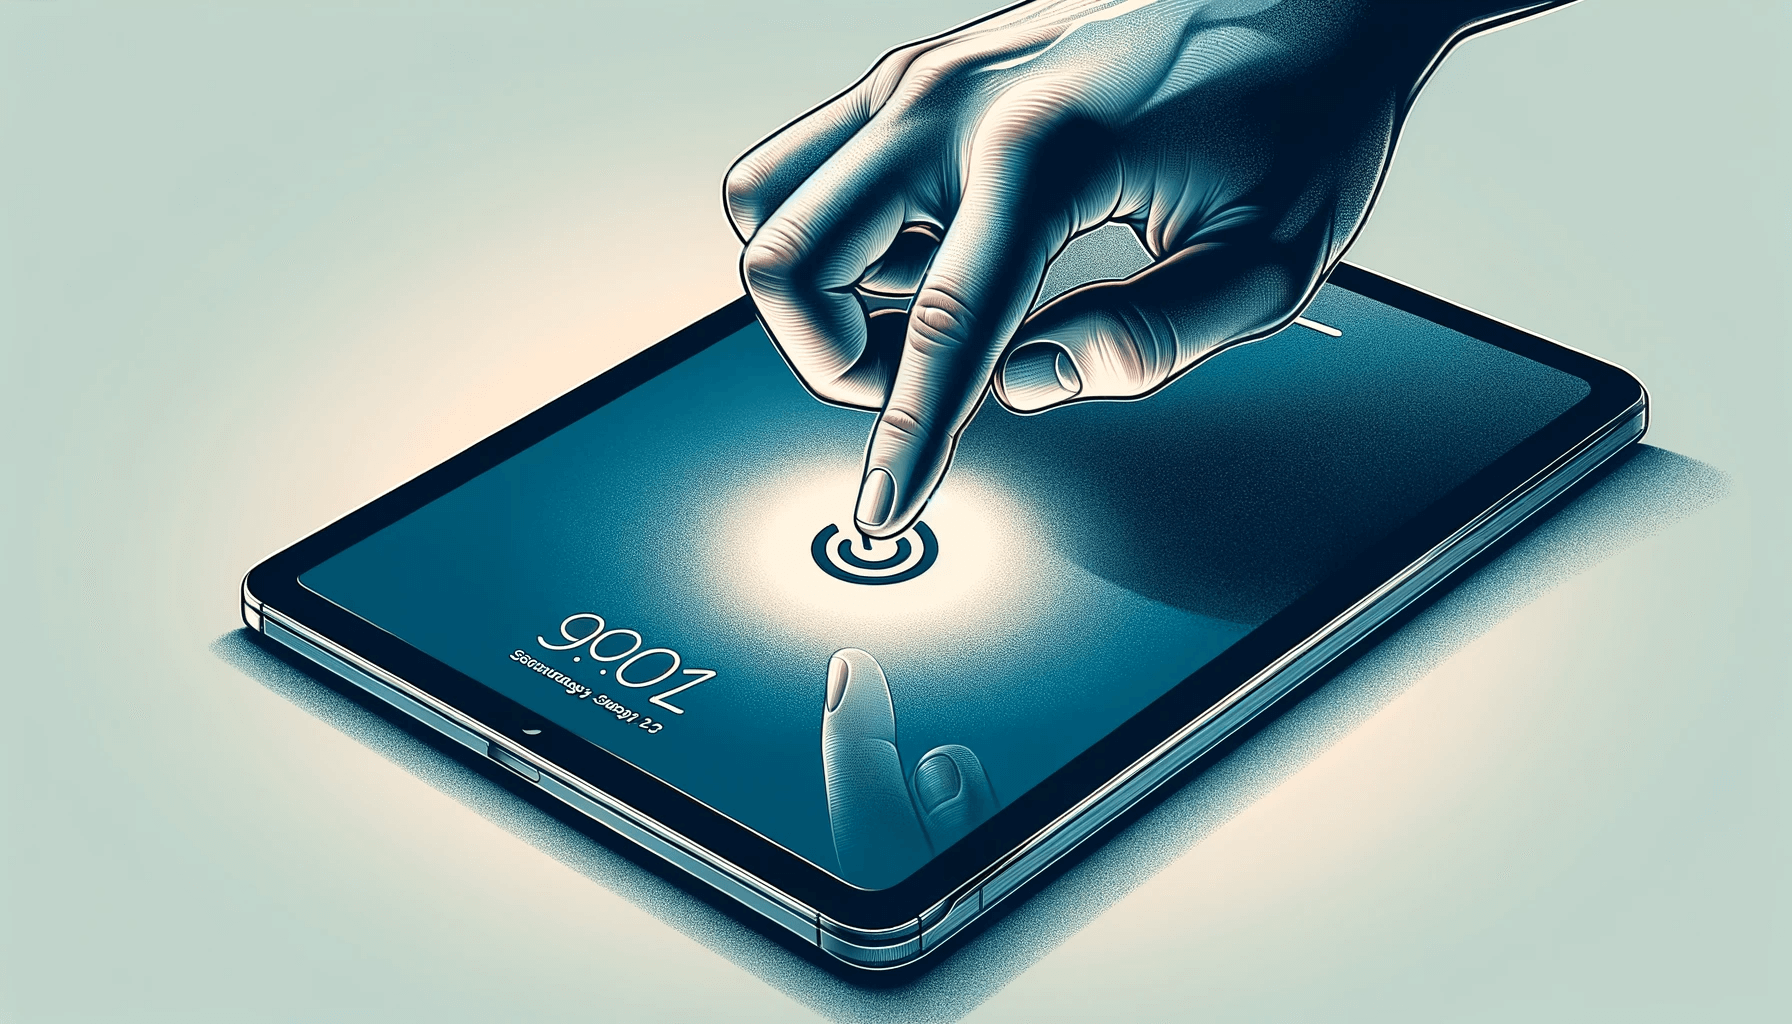 DALL·E 2023 12 26 17.33.41 A digital illustration of a person turning on an iPad. The illustration shows a persons hand pressing the power button of an iPad which is depicted